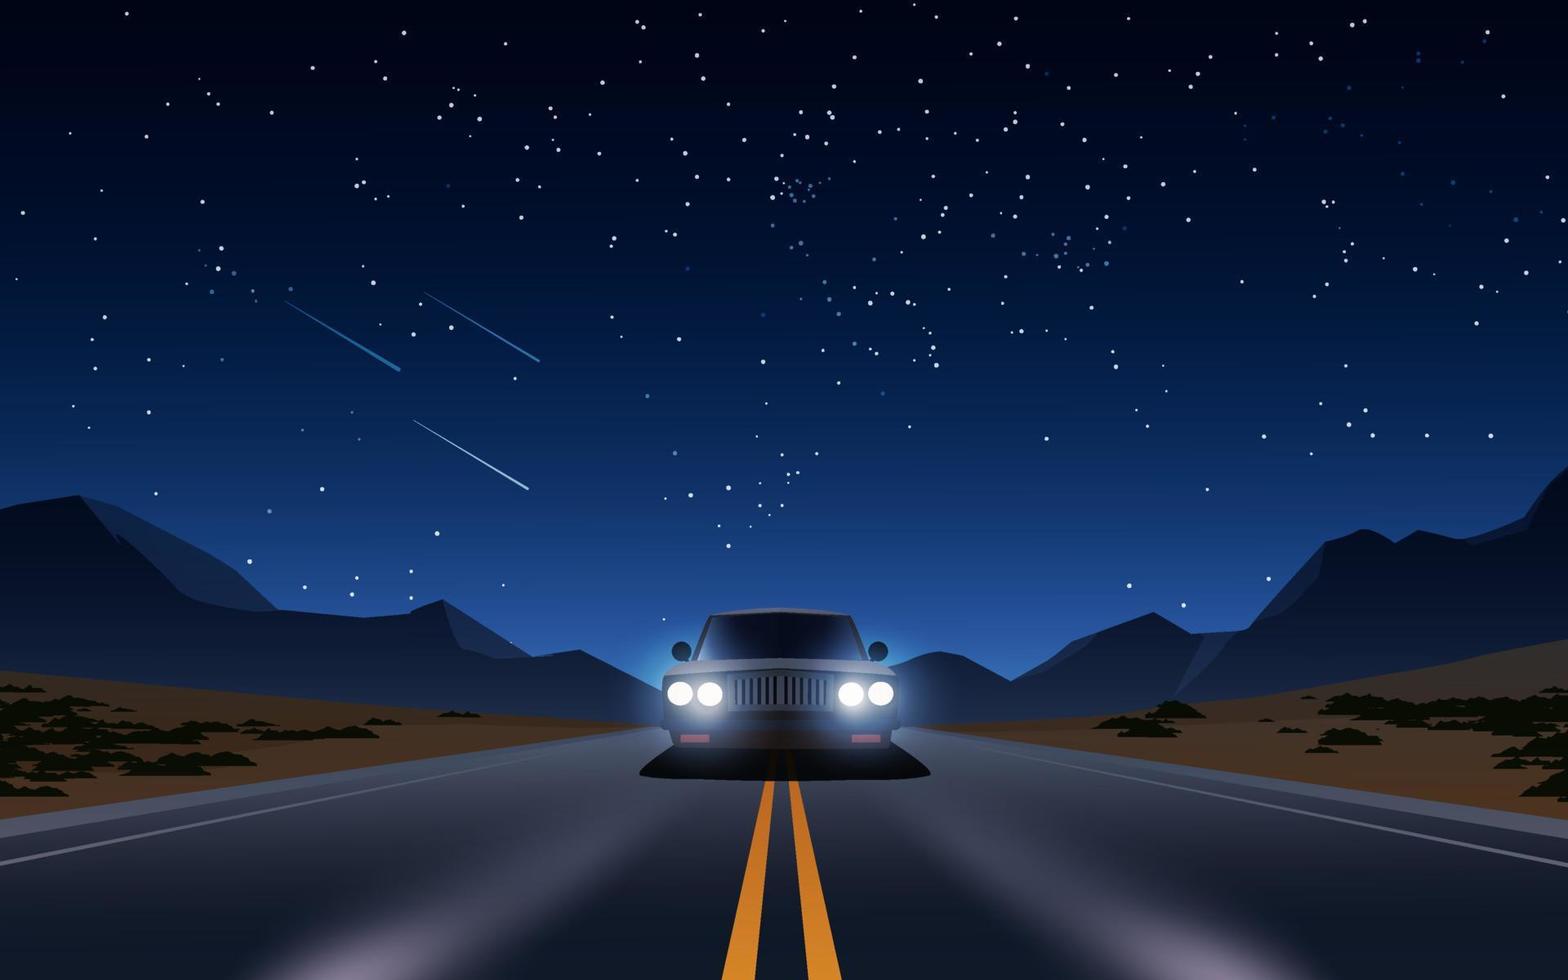 Car driving in desert highway at night under the starry sky vector